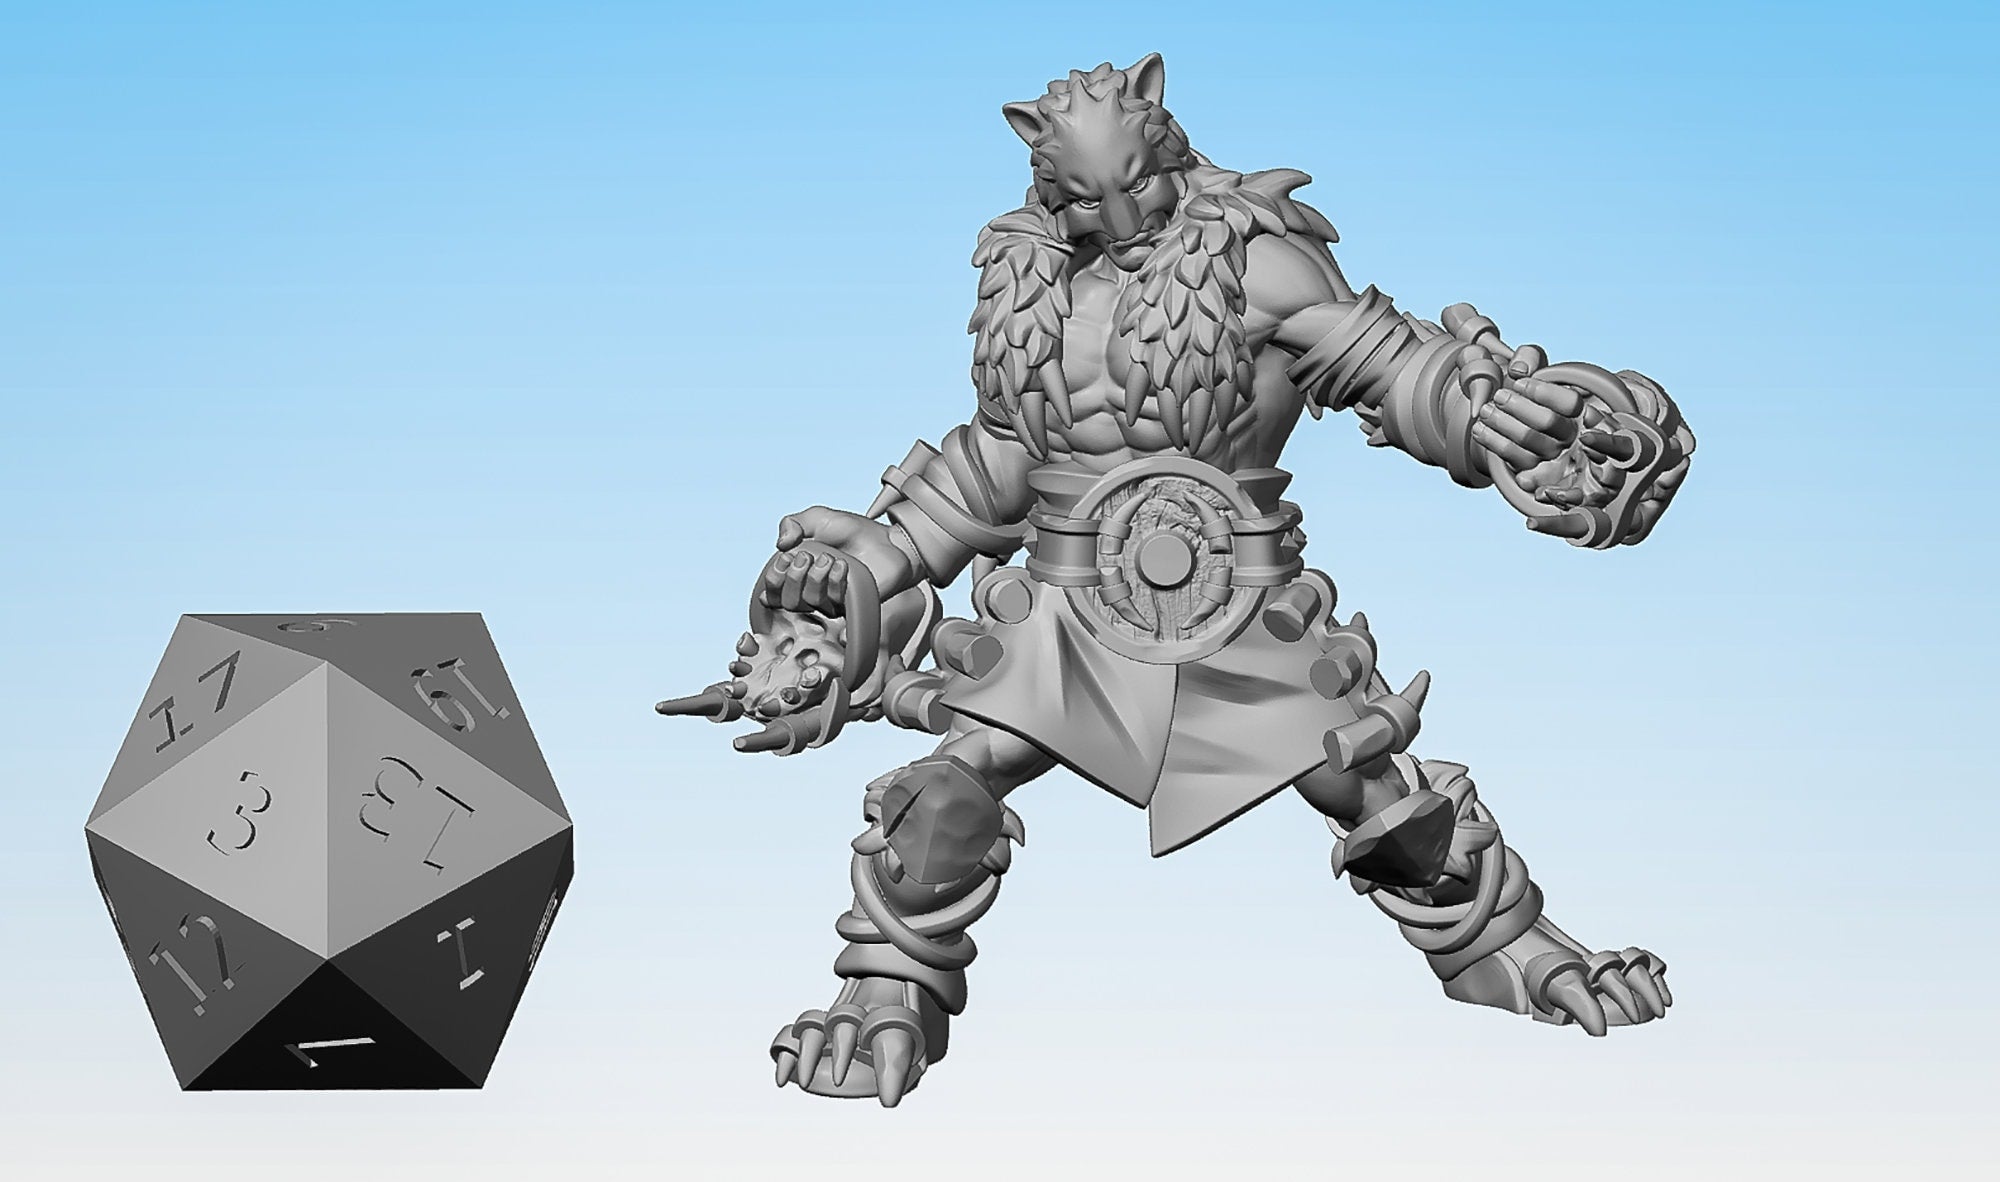 Beast Master "Claws"-Role Playing Miniatures